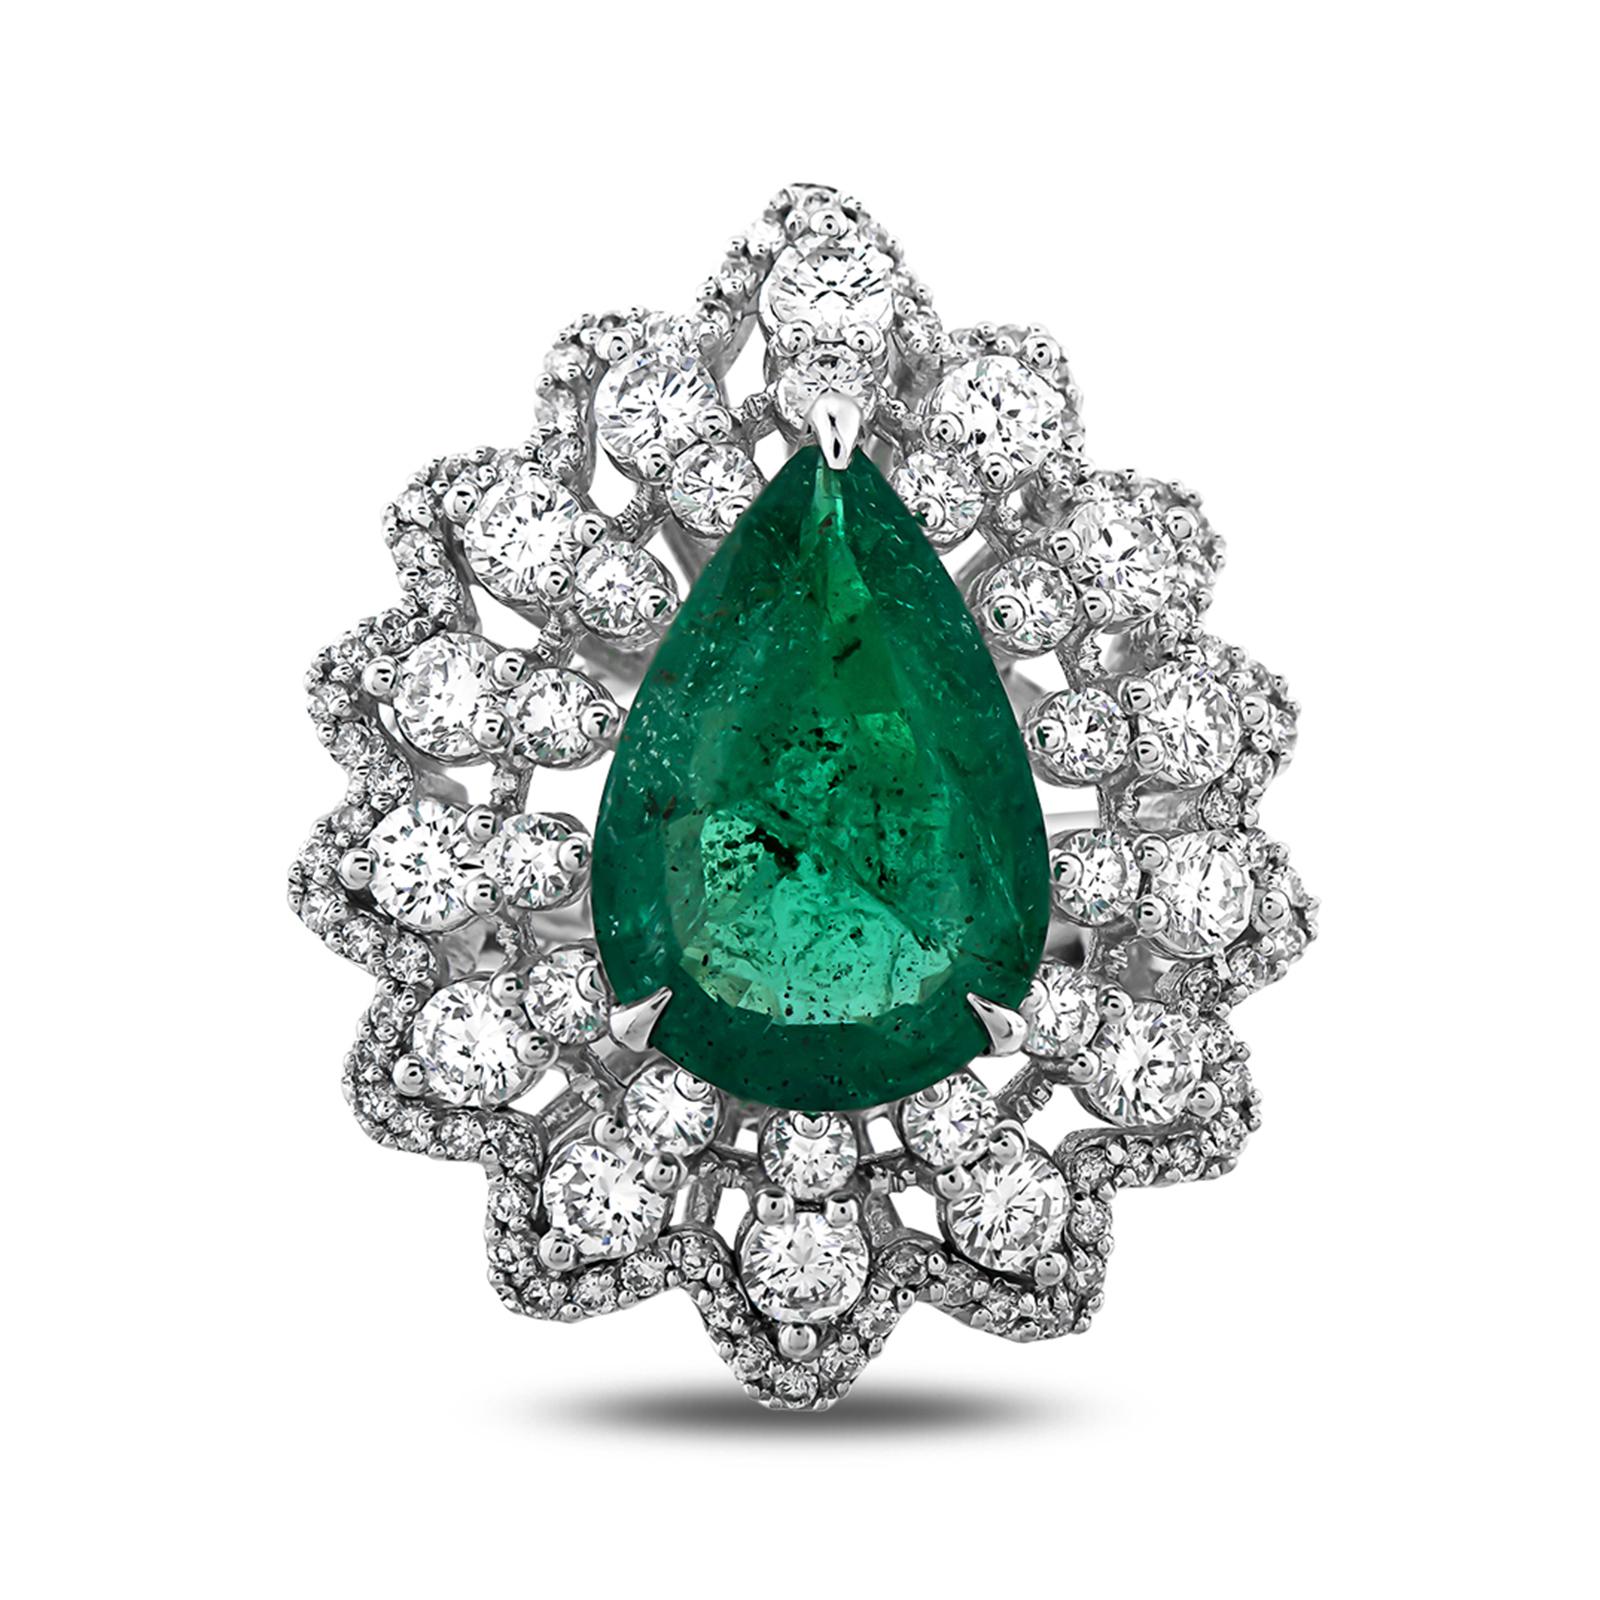 For Sale:  5.82 Carat Pear Shaped Emerald and Diamond Cocktail Ring 18 Karat White Gold 2